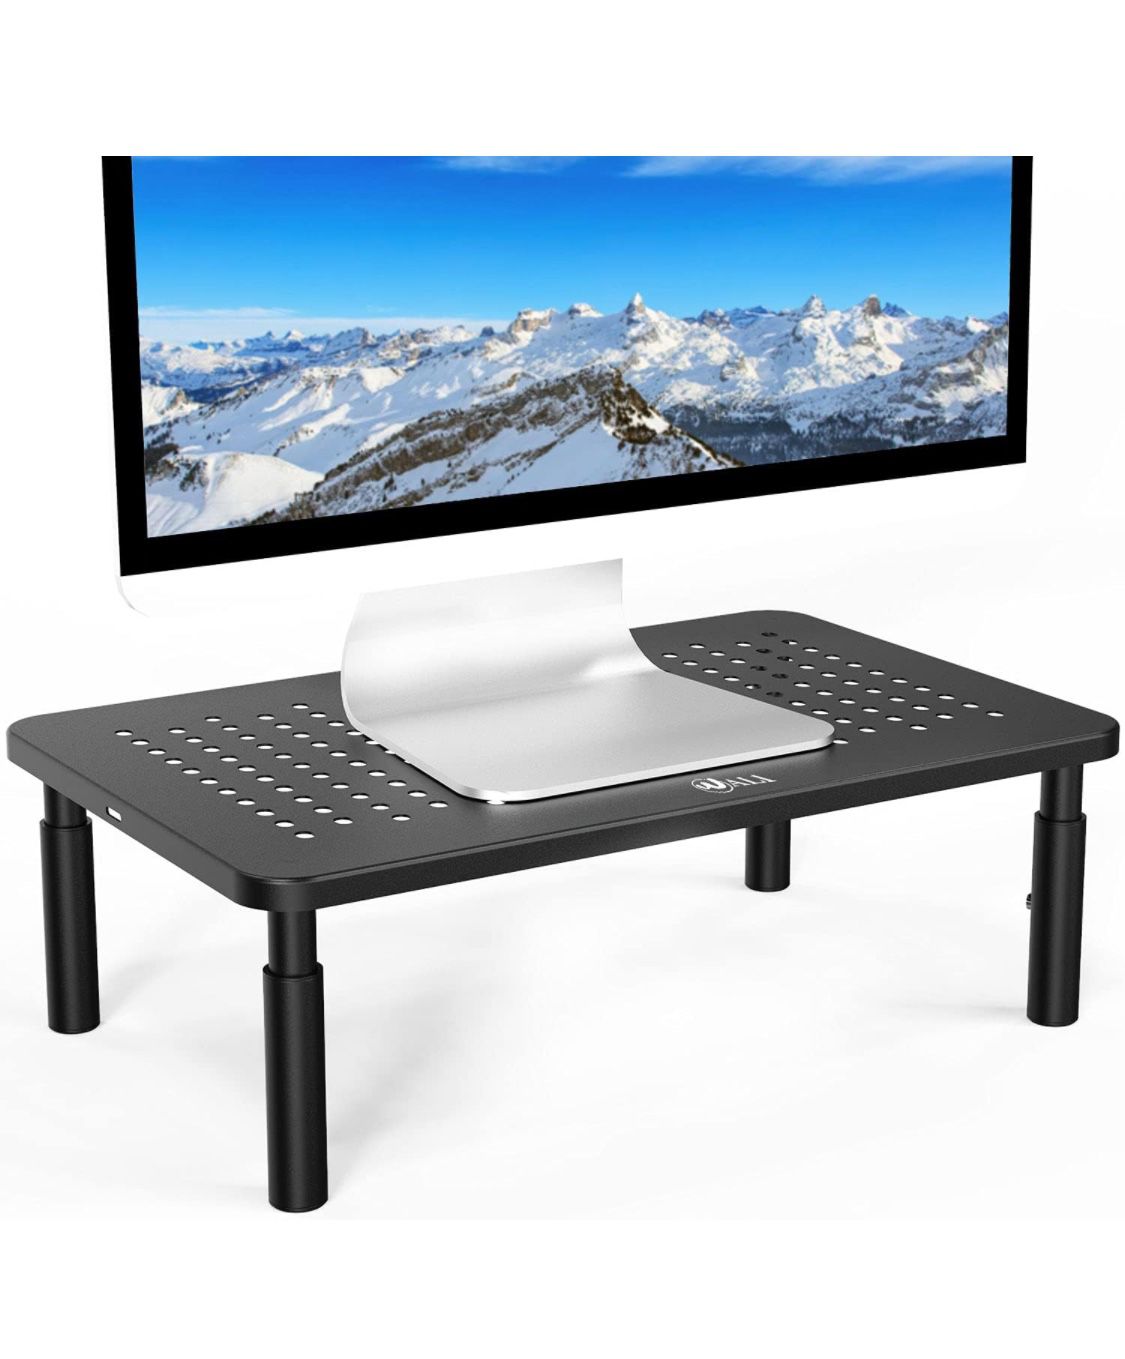 New! Computer Monitor Stand for Desk, Adjustable Laptop Riser, Desk Monitor Stand Underneath Storage for Office, Home, School Supplies, 1 Pack, Black